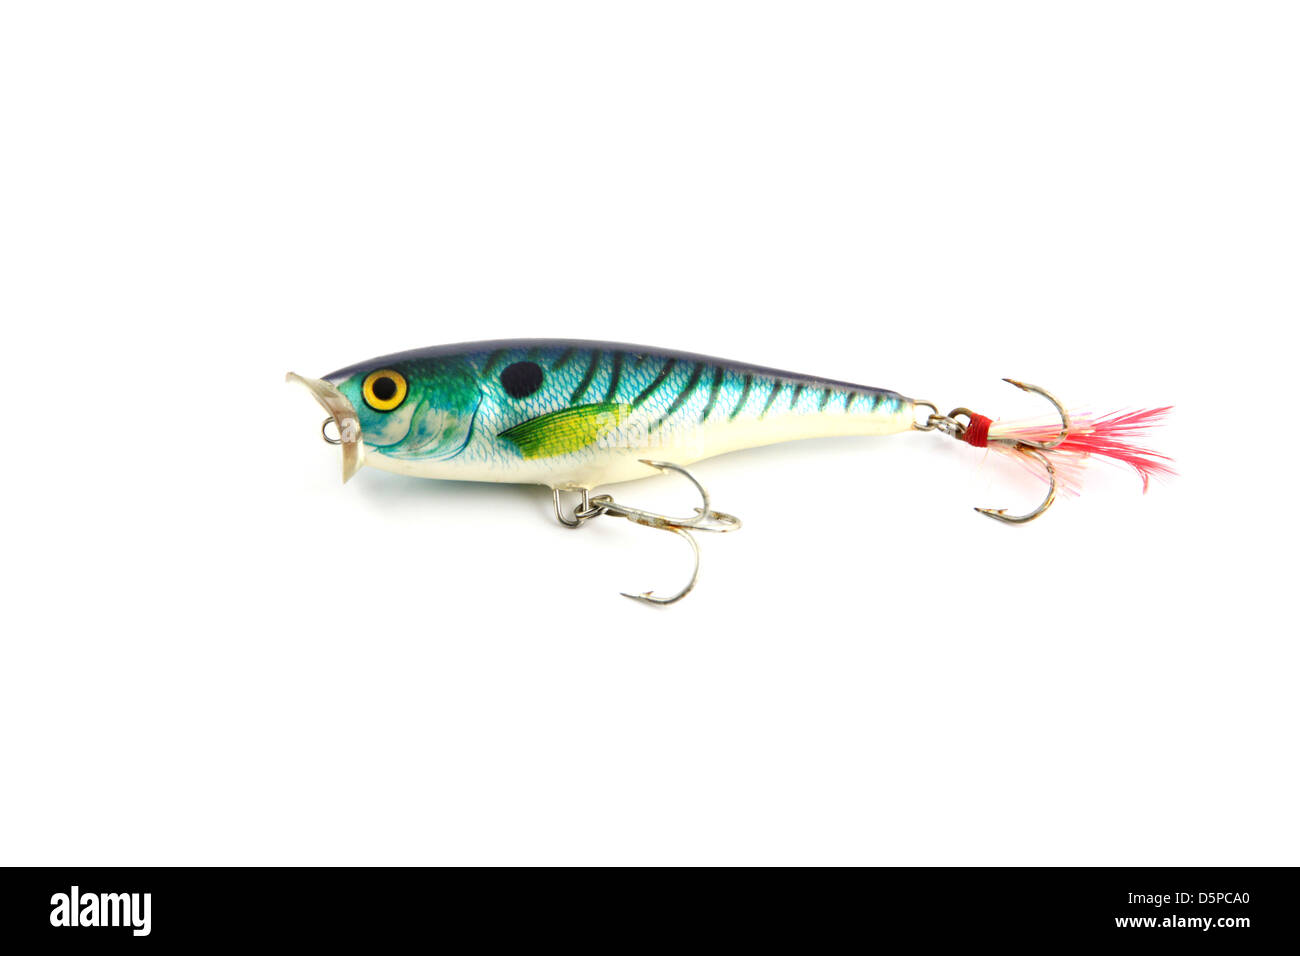 https://c8.alamy.com/comp/D5PCA0/focus-the-lure-poper-3d-is-fishing-on-white-background-D5PCA0.jpg